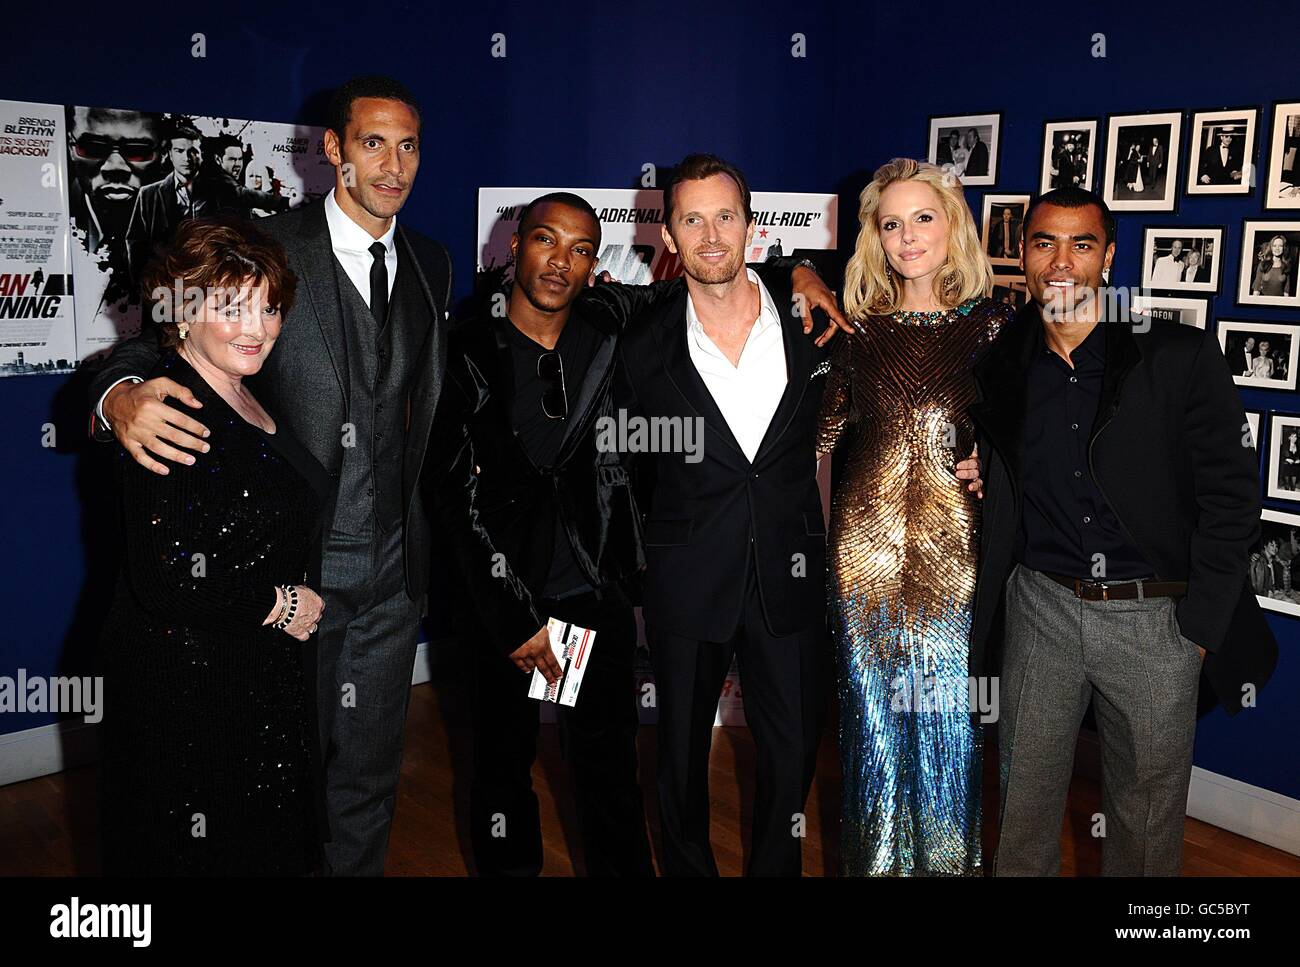 (left to right) Brenda Blethyn, Rio Ferdinand, Ashley Walters, Alex De Rakoff, Monet Mazur and Ashley Cole arriving for the world premiere of Dead Man Running at the Odeon West End, Leicester Square, London Stock Photo